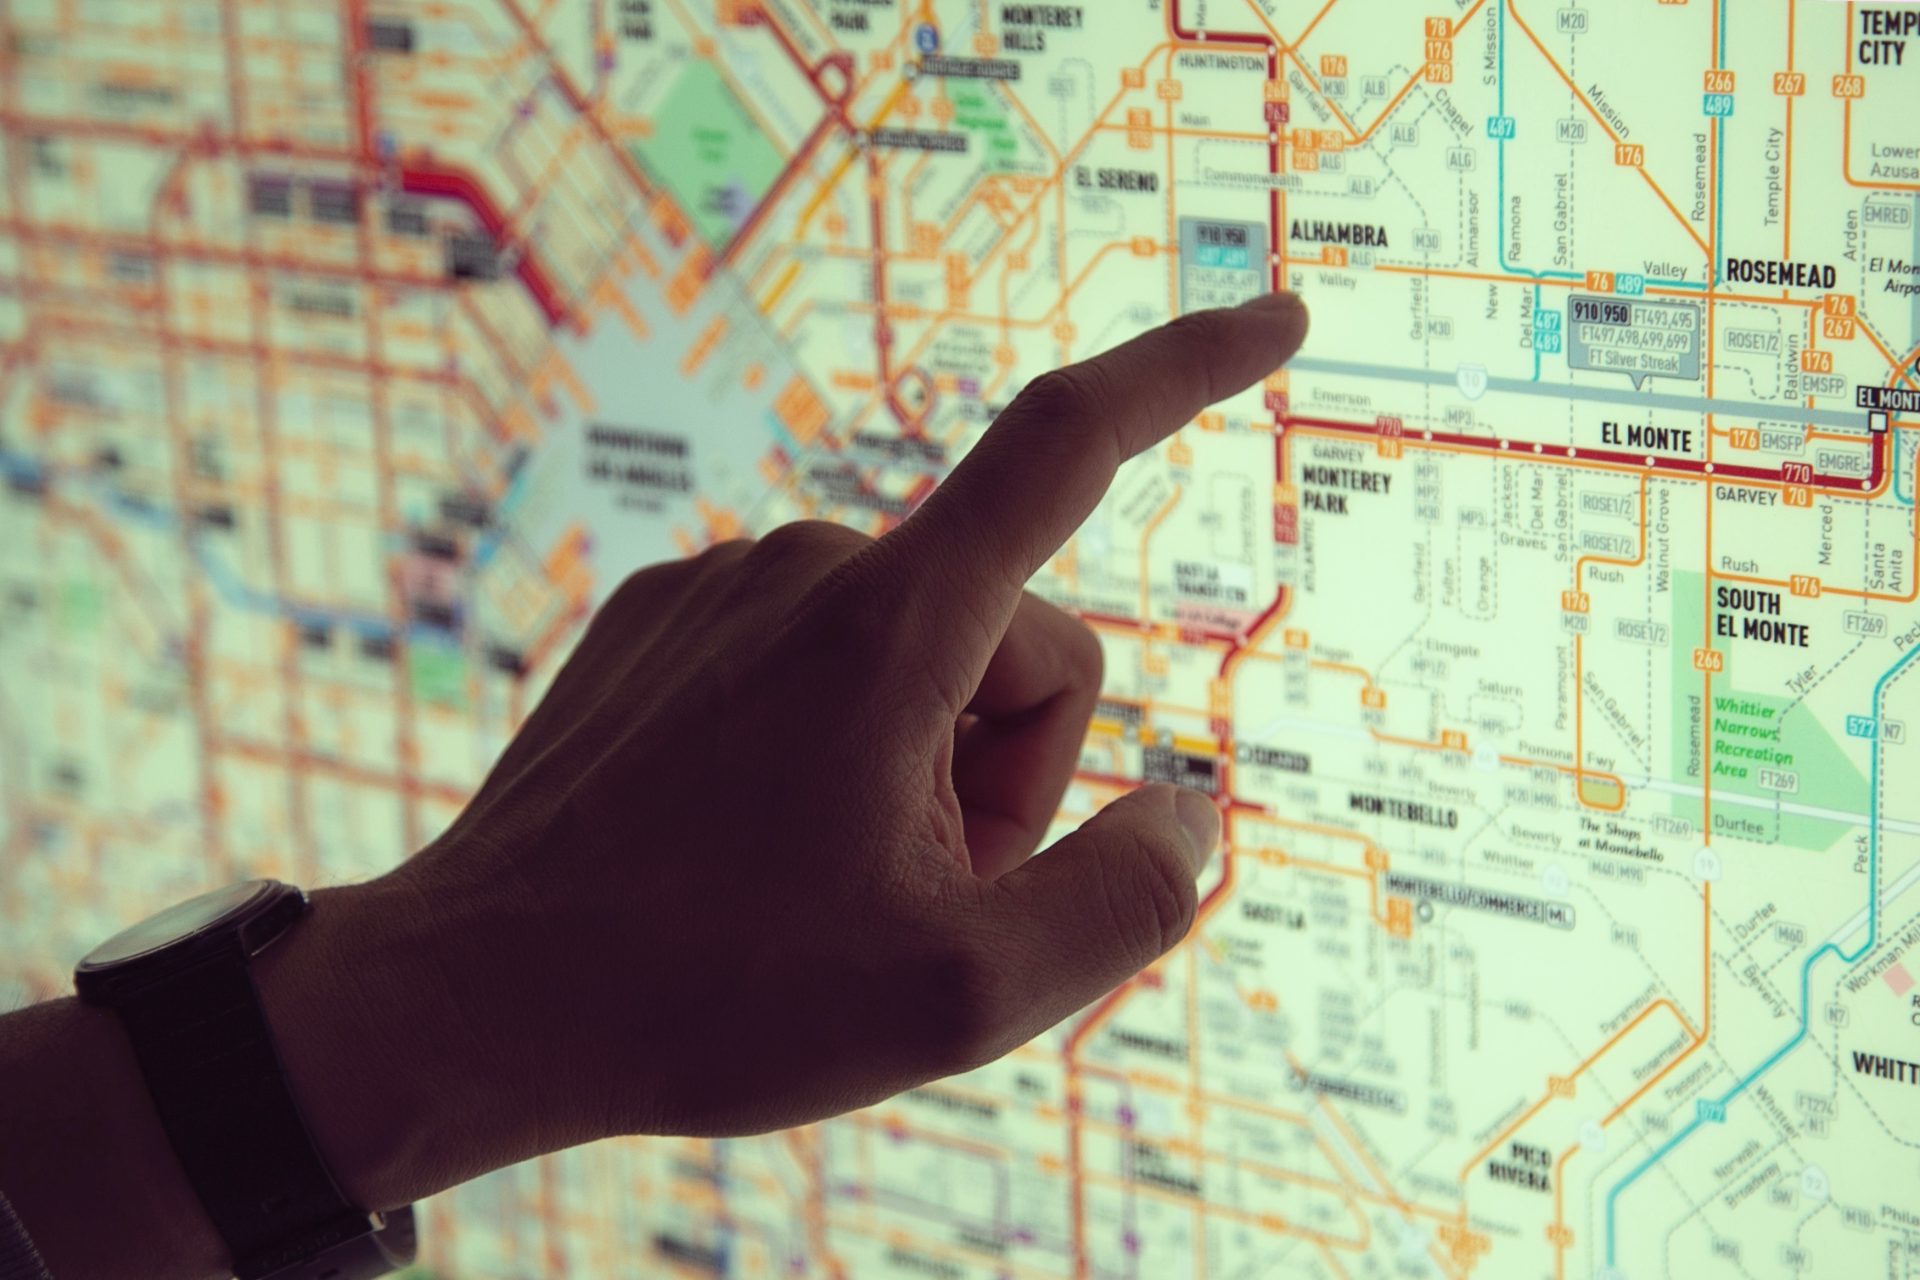 Hand pointing to a location on a map screen